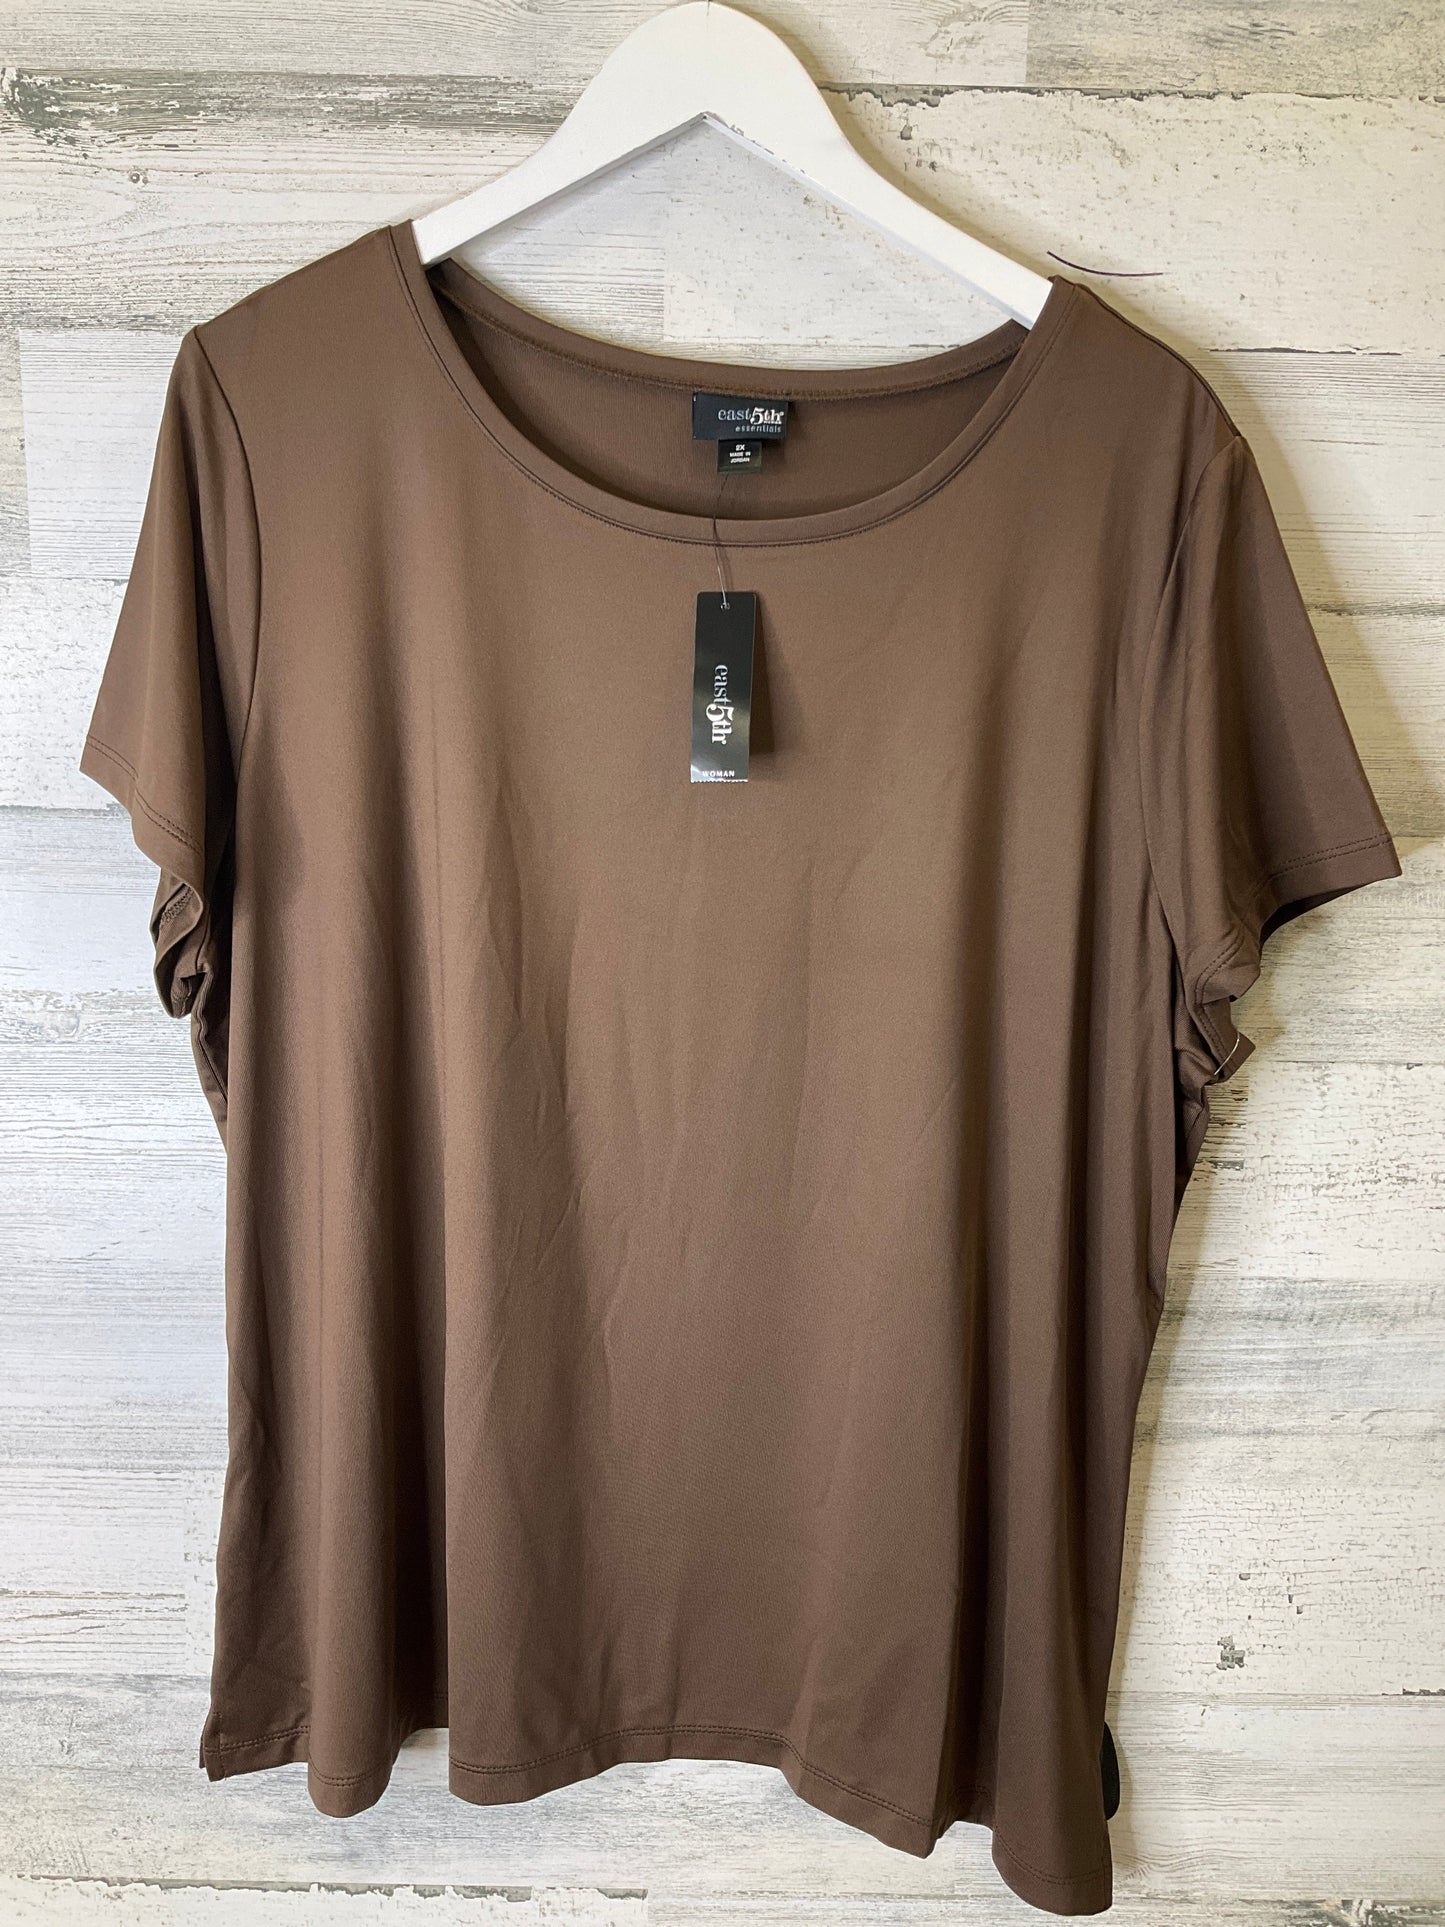 Brown Top Short Sleeve East 5th, Size 2x